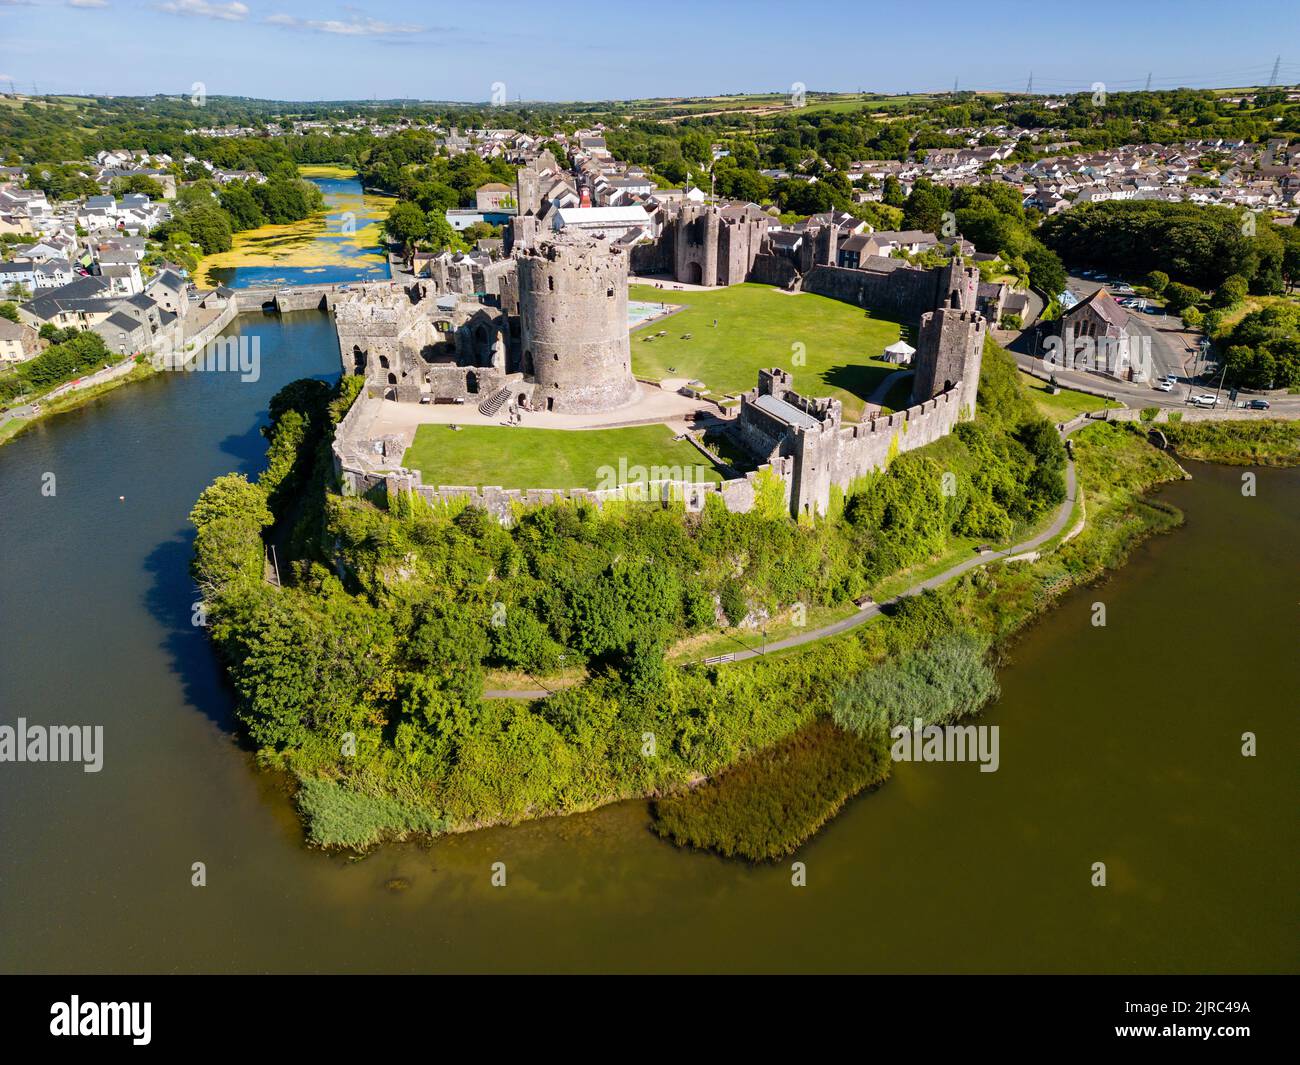 Aerial view of the ruins of a large, ancient castle in Wales (Pembroke Castle, Pembrokeshire) Stock Photo